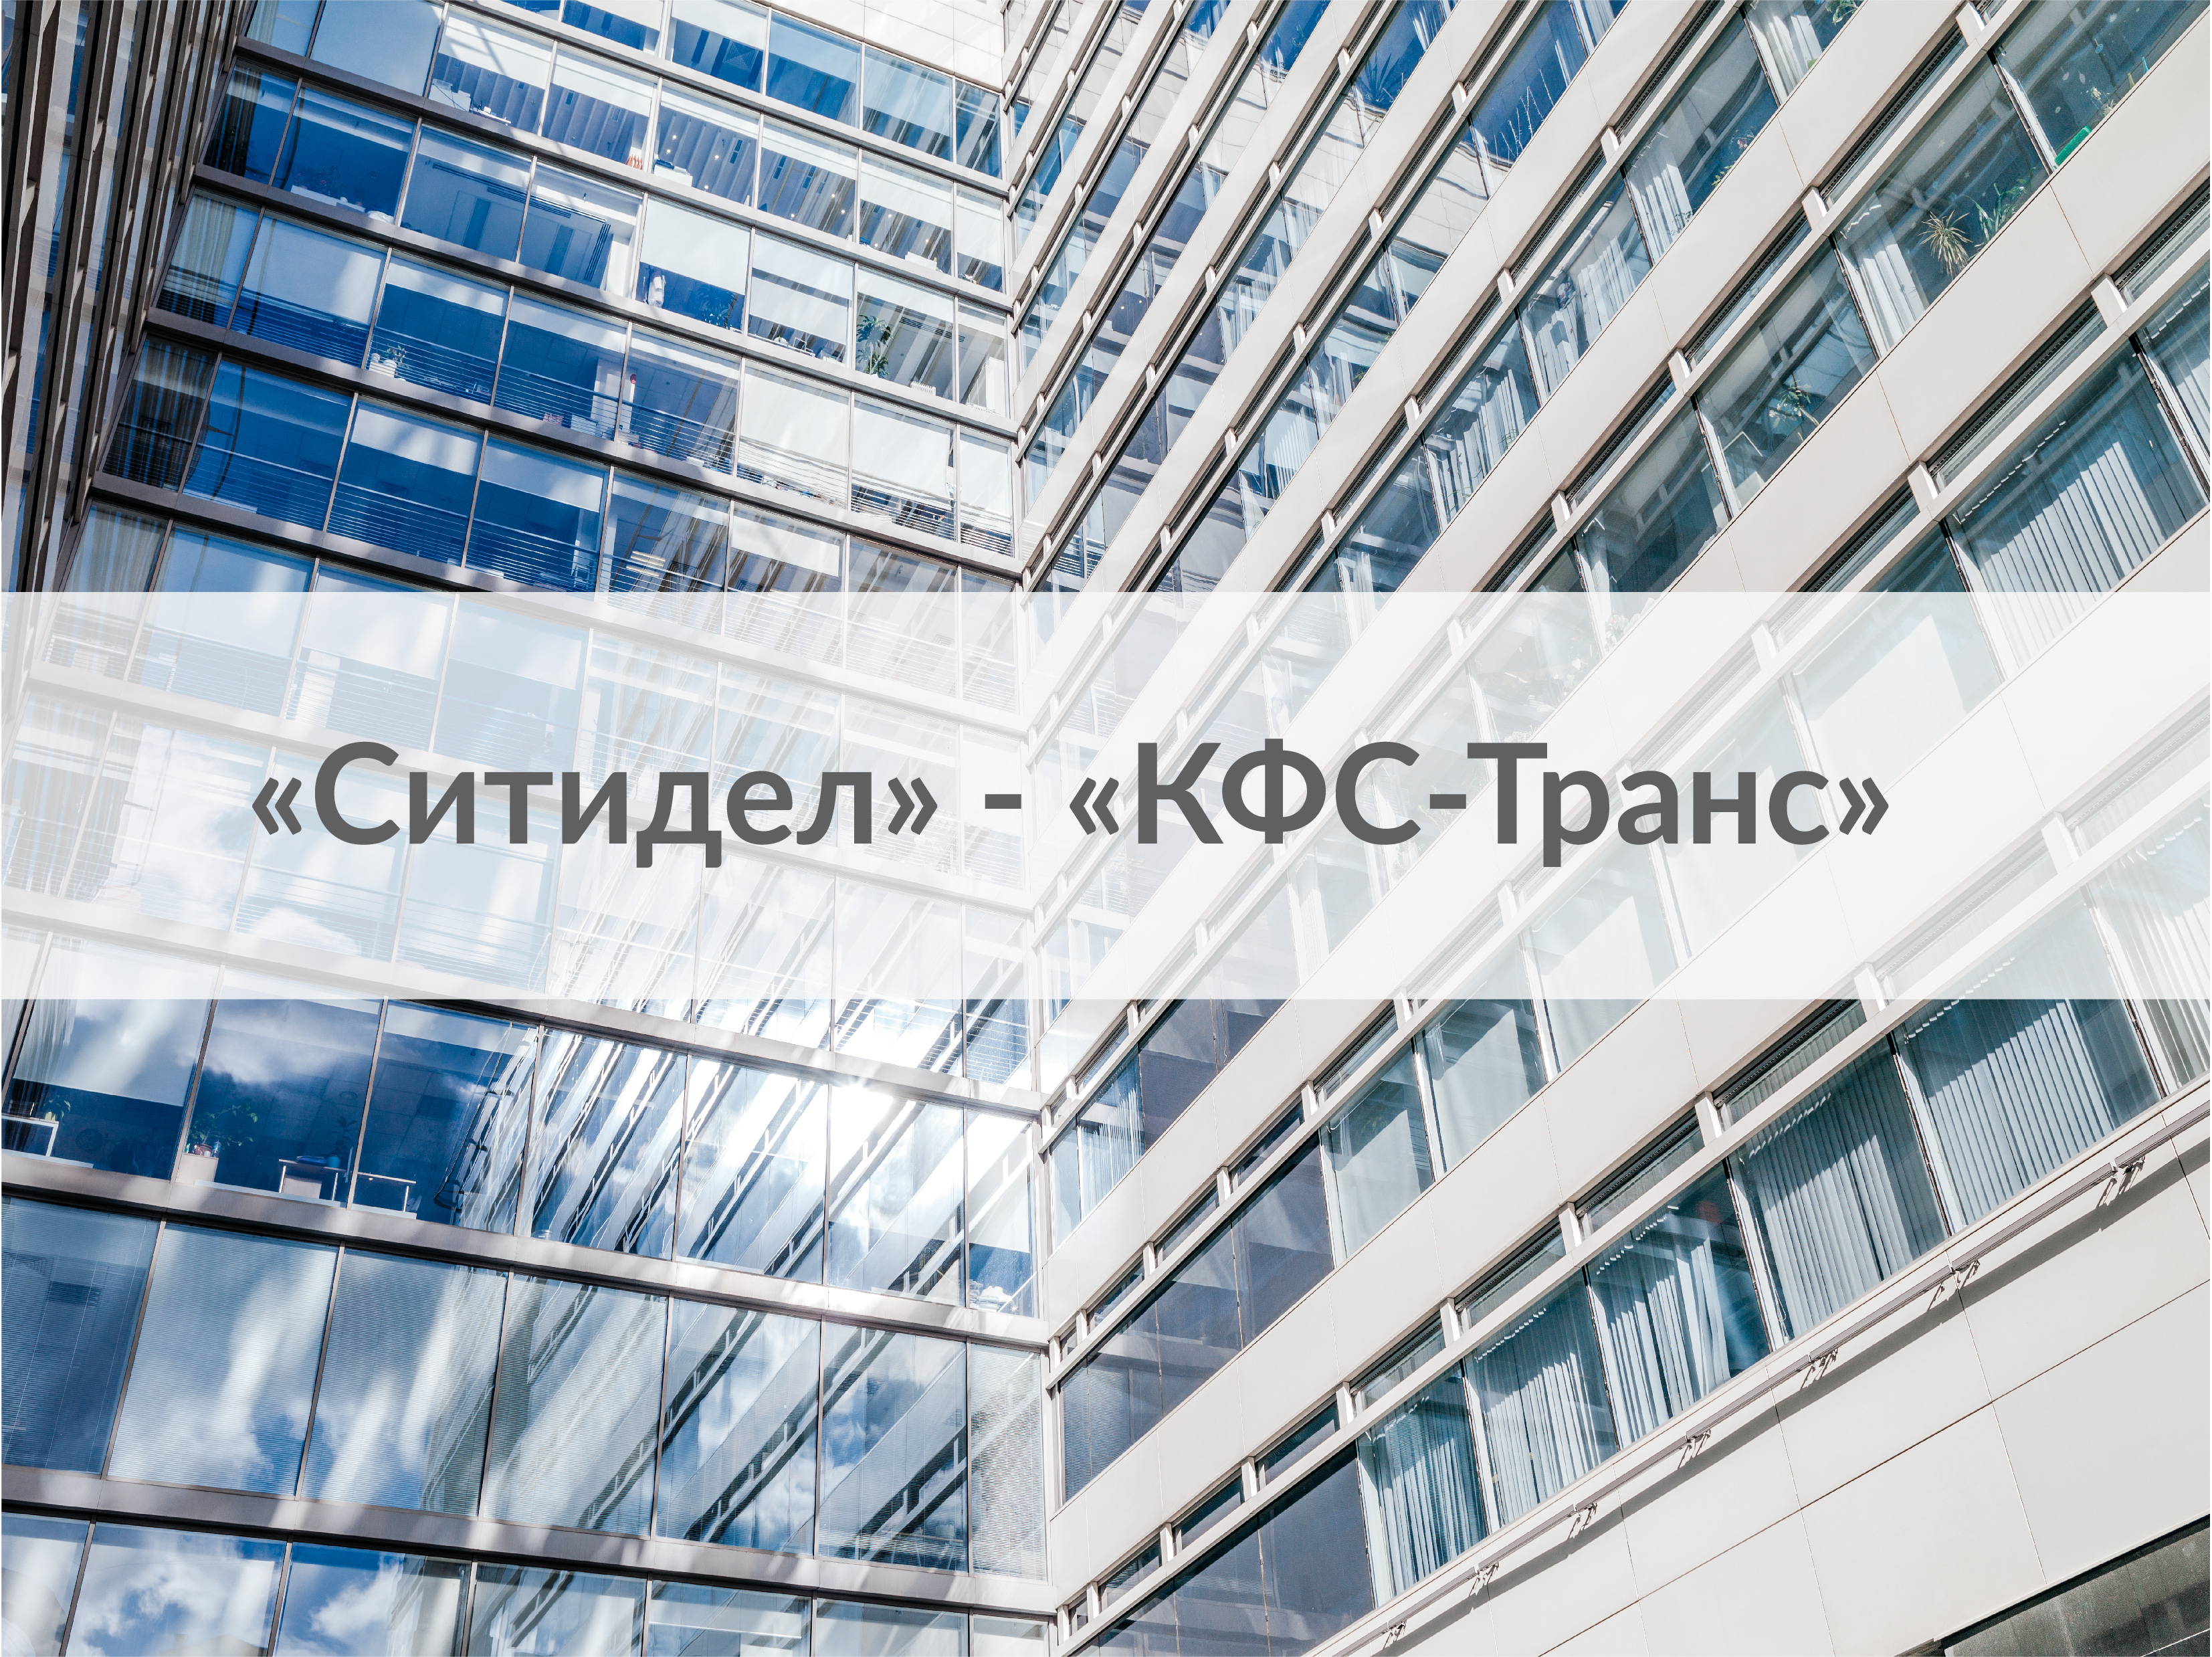 KFS-Trans JSC has become a direct tenant in CITYDEL Business Center